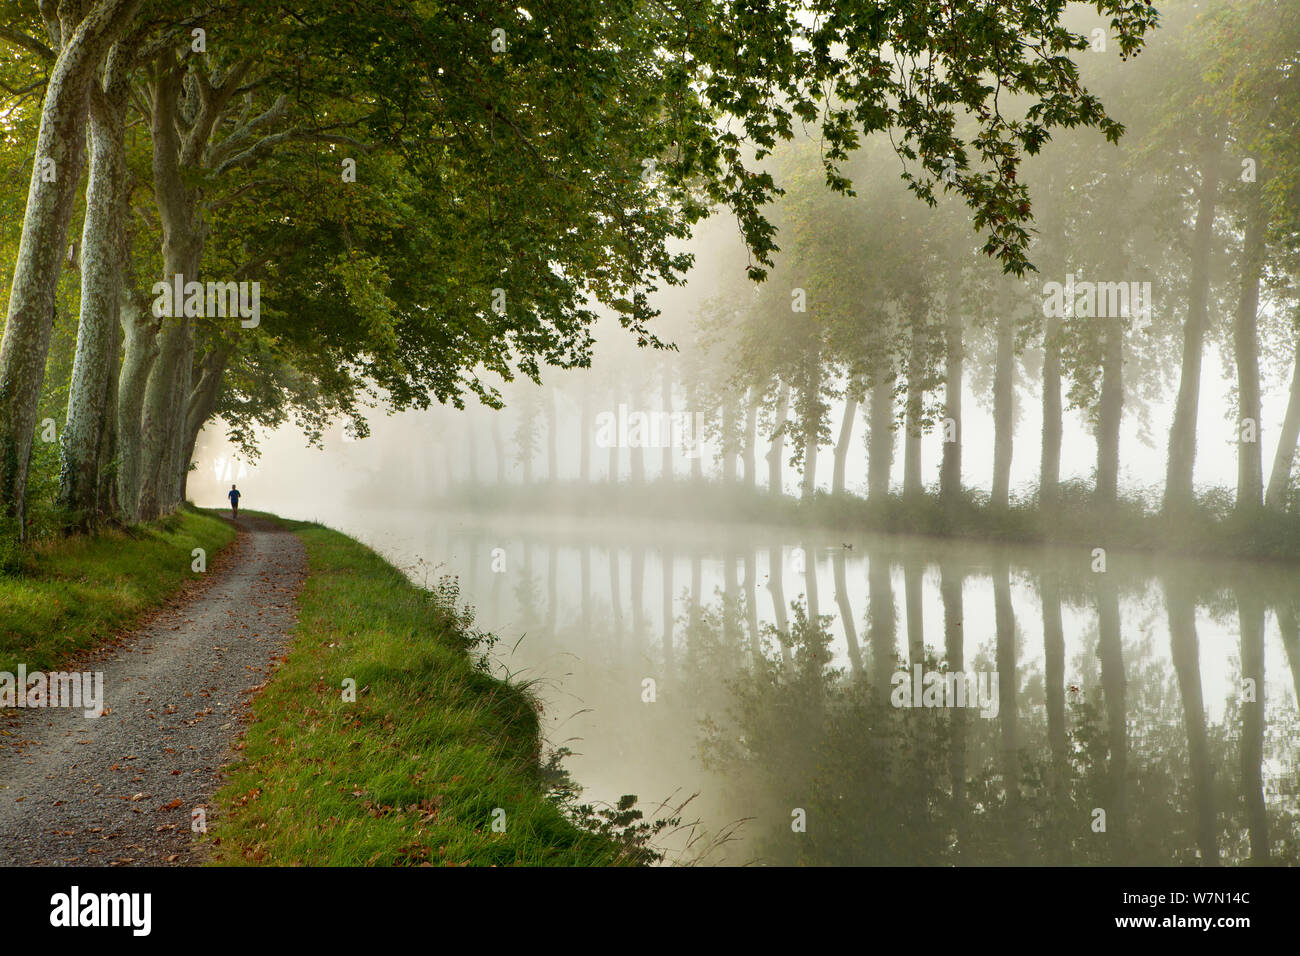 A jogger on the towpath of the Canal du Midi near Castelnaudary, Languedoc-Rousillon, France. Septeber 2011. Stock Photo